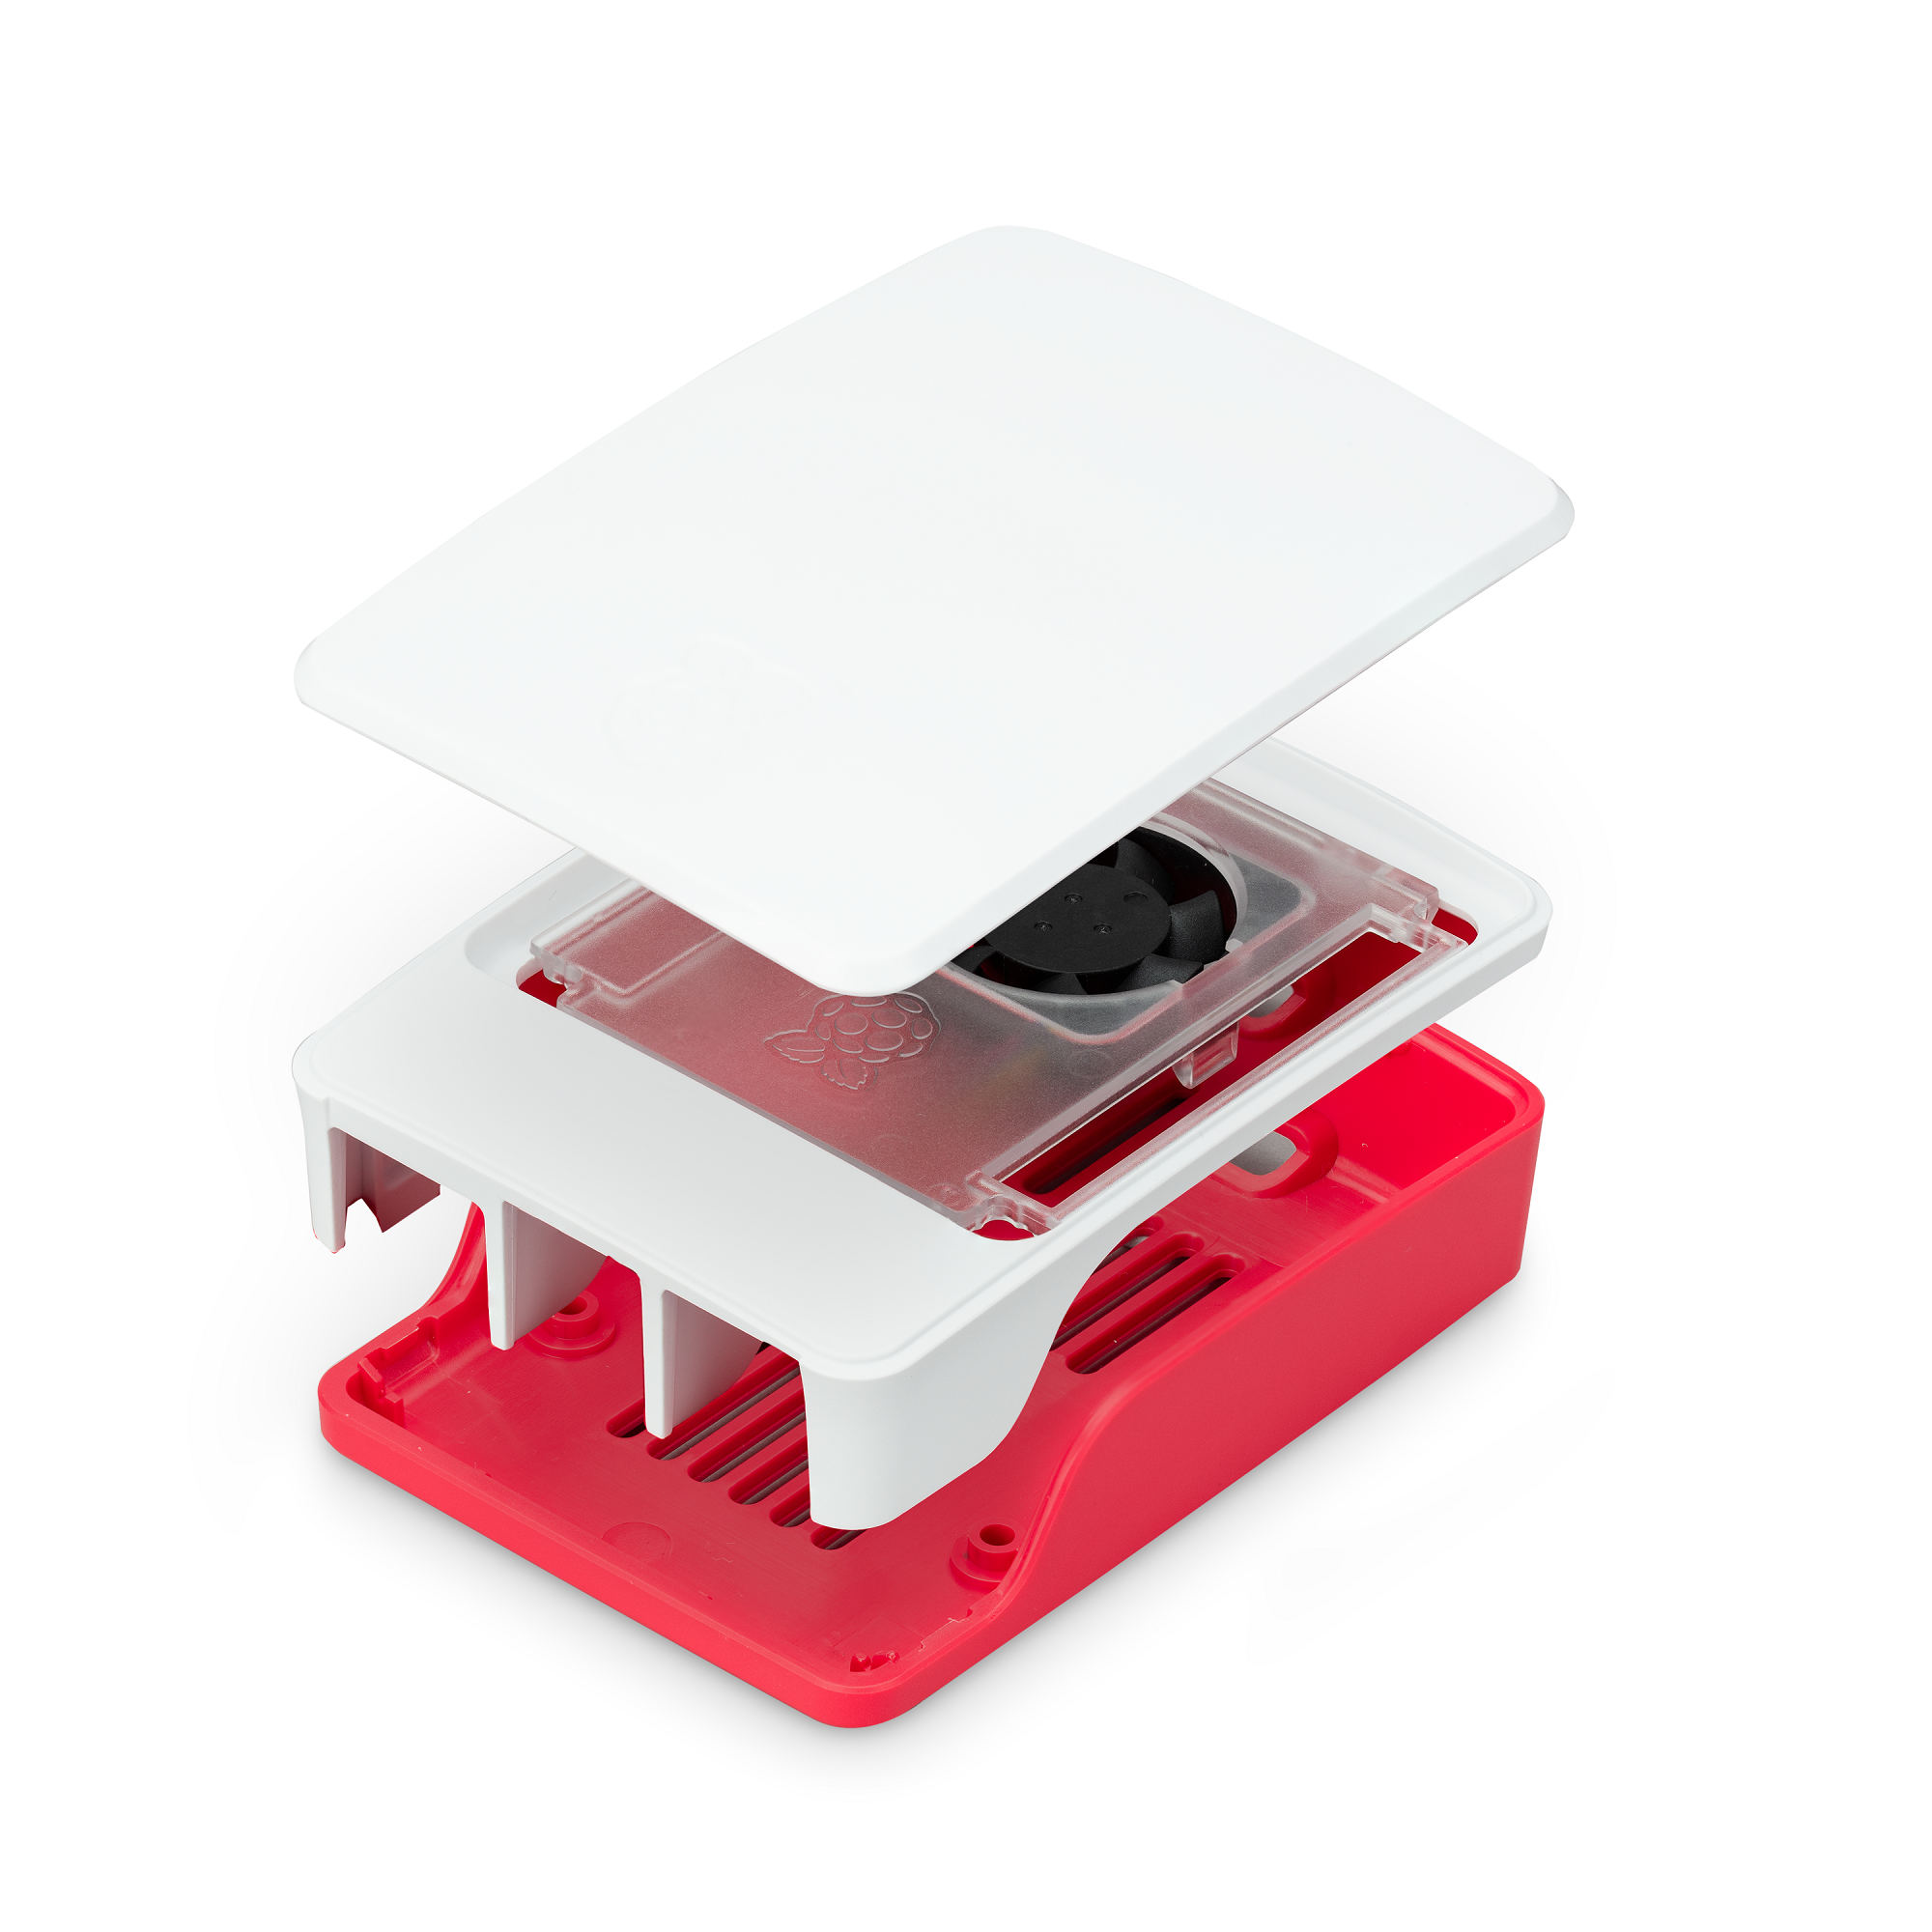 Vilros Duo Deluxe Raspberry Pi 5 Case- The Deluxe Passive and Active  Cooling Case for Pi 5